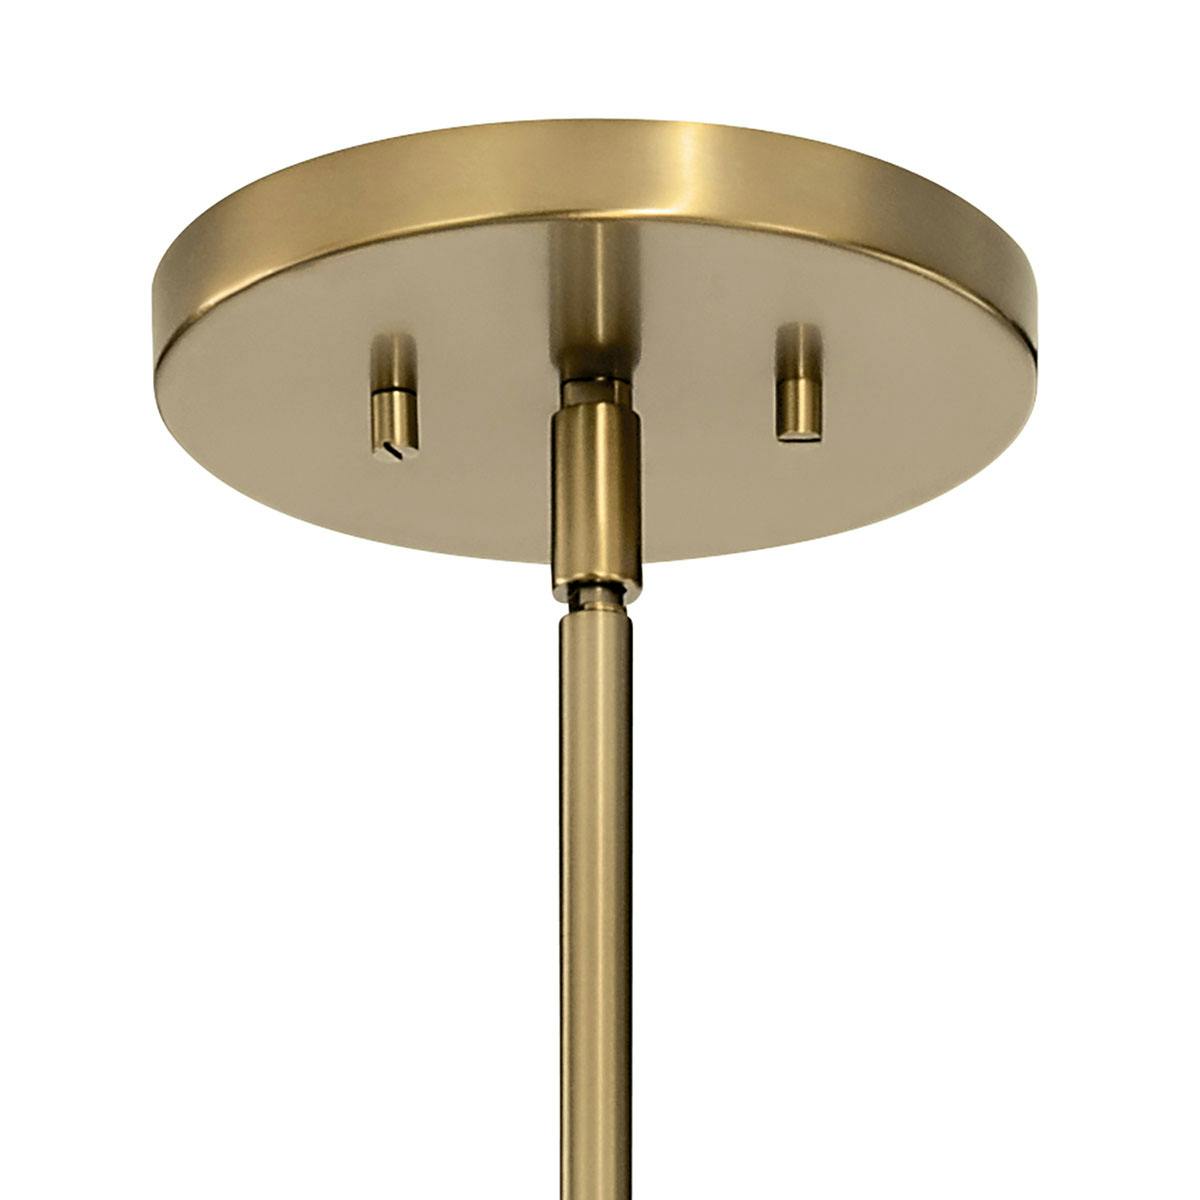 Canopy for the Tolani 6 Light Chandelier Brass on a white background